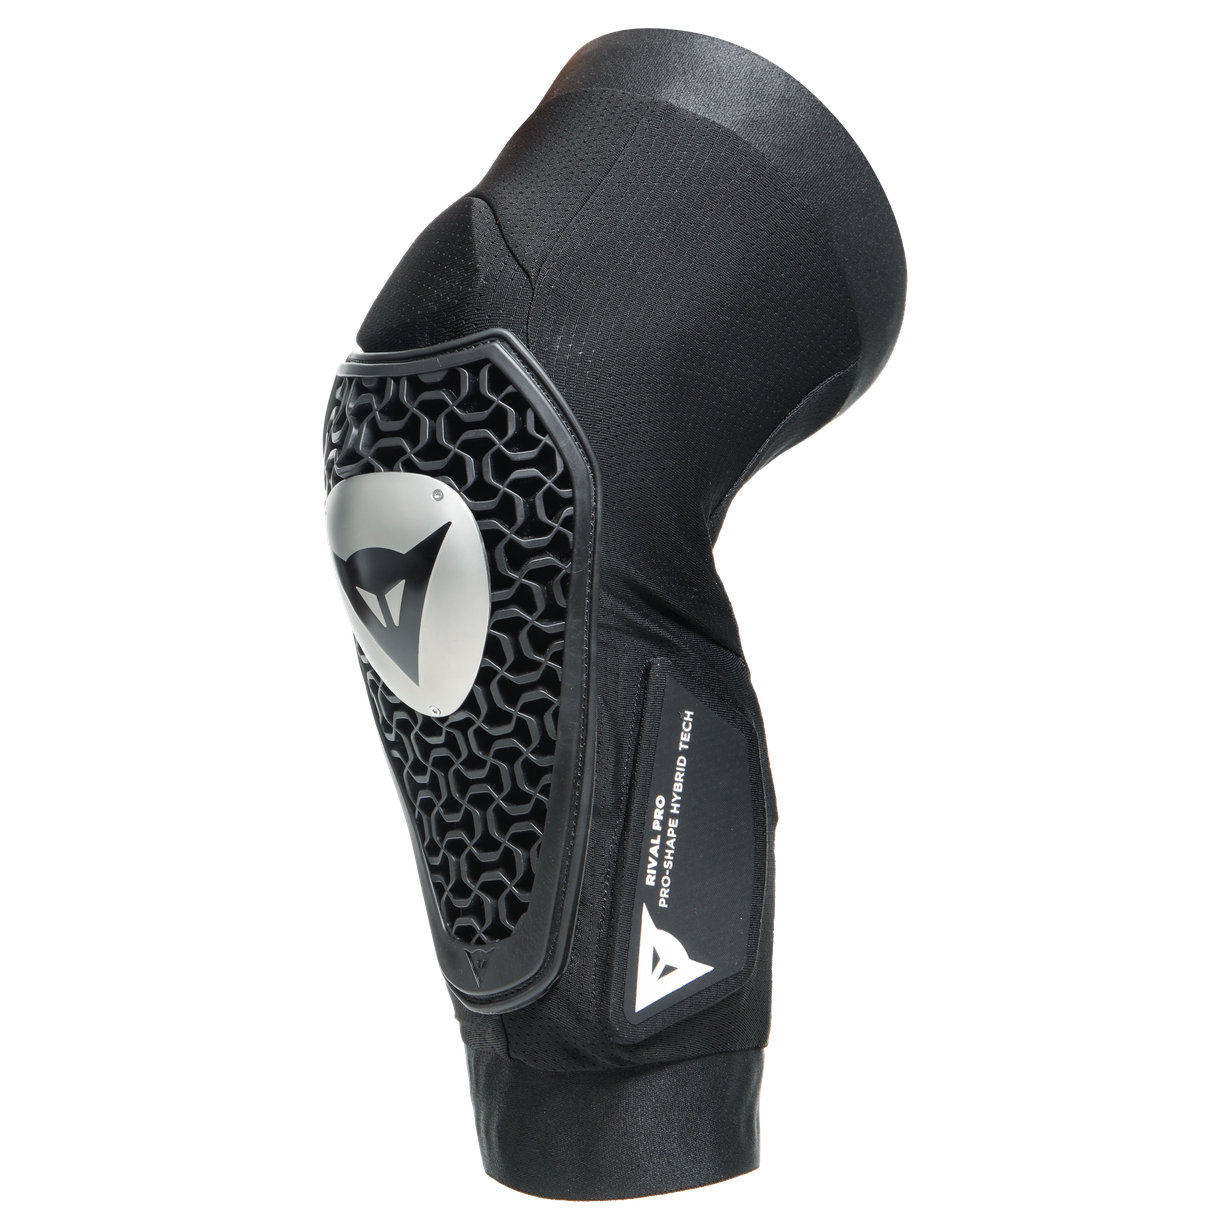 DAINESE Rival Pro Knee Guards, black